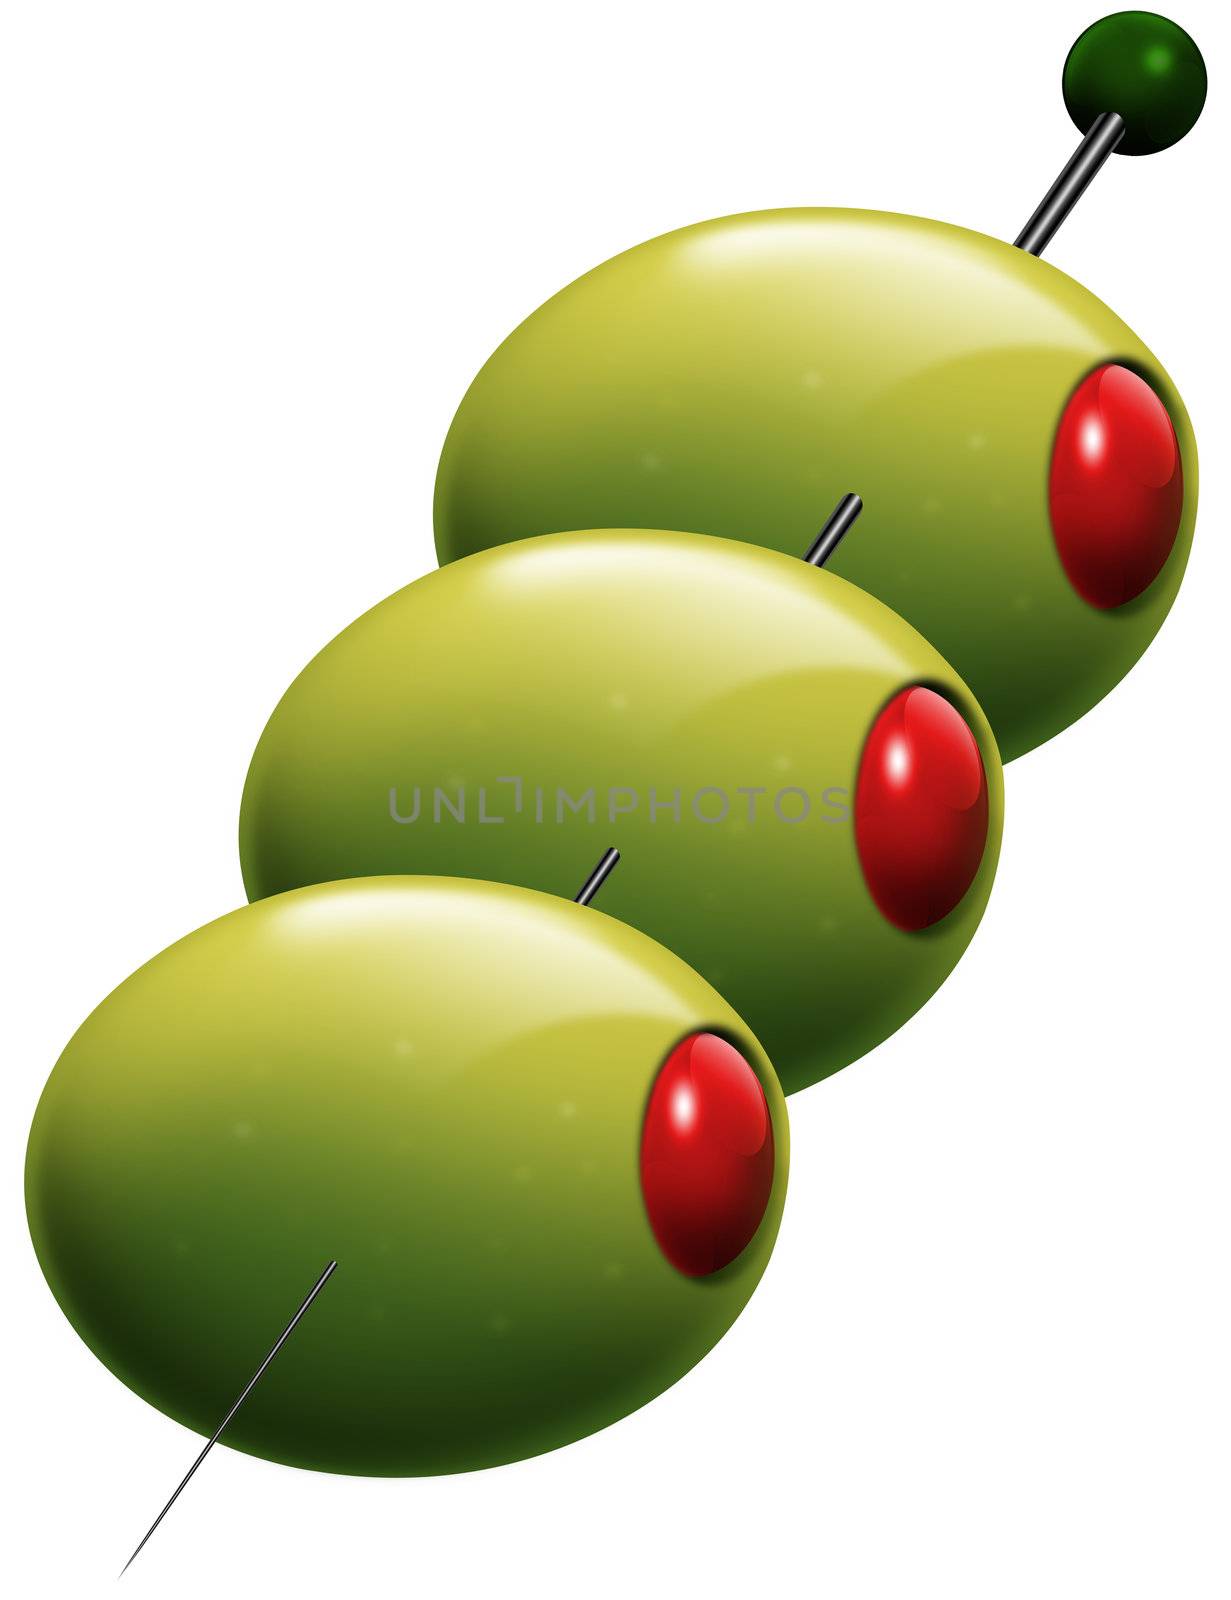 Illustration of 3 green olives stuffed with red pepper or tomato on a stick